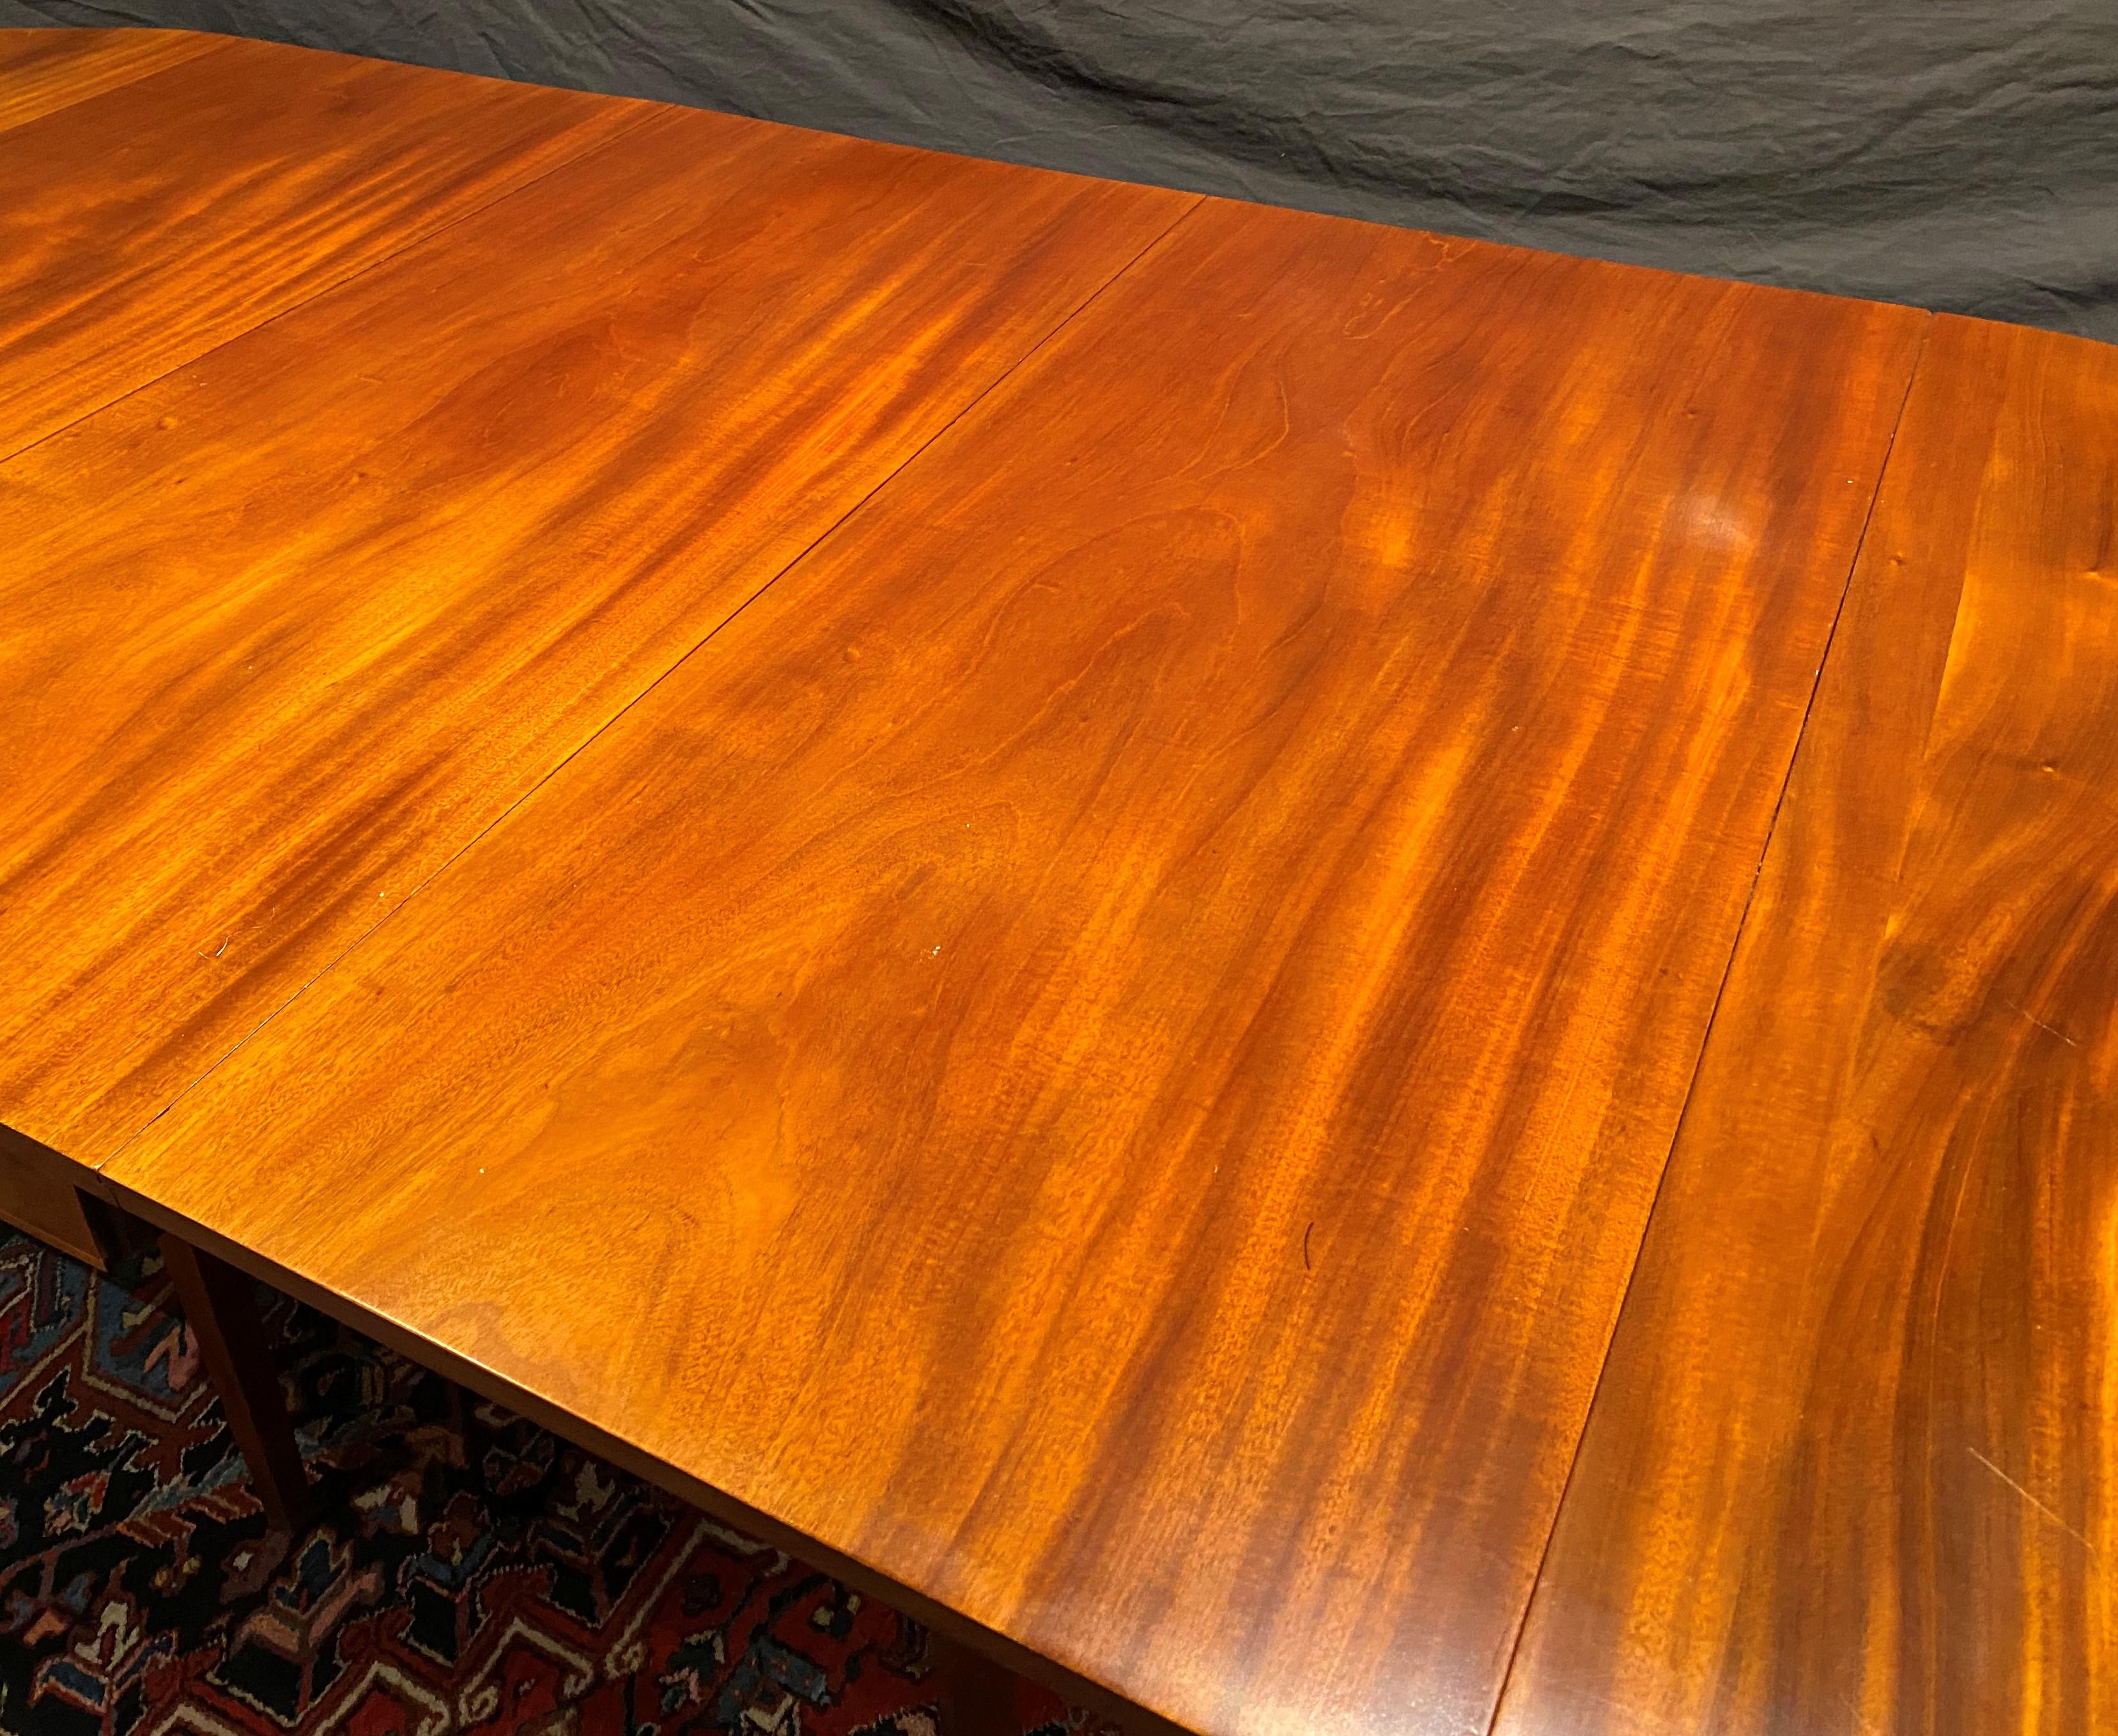 American 19th c Federal Mahogany Dining Table with “D” Ends & Center Dropleaf